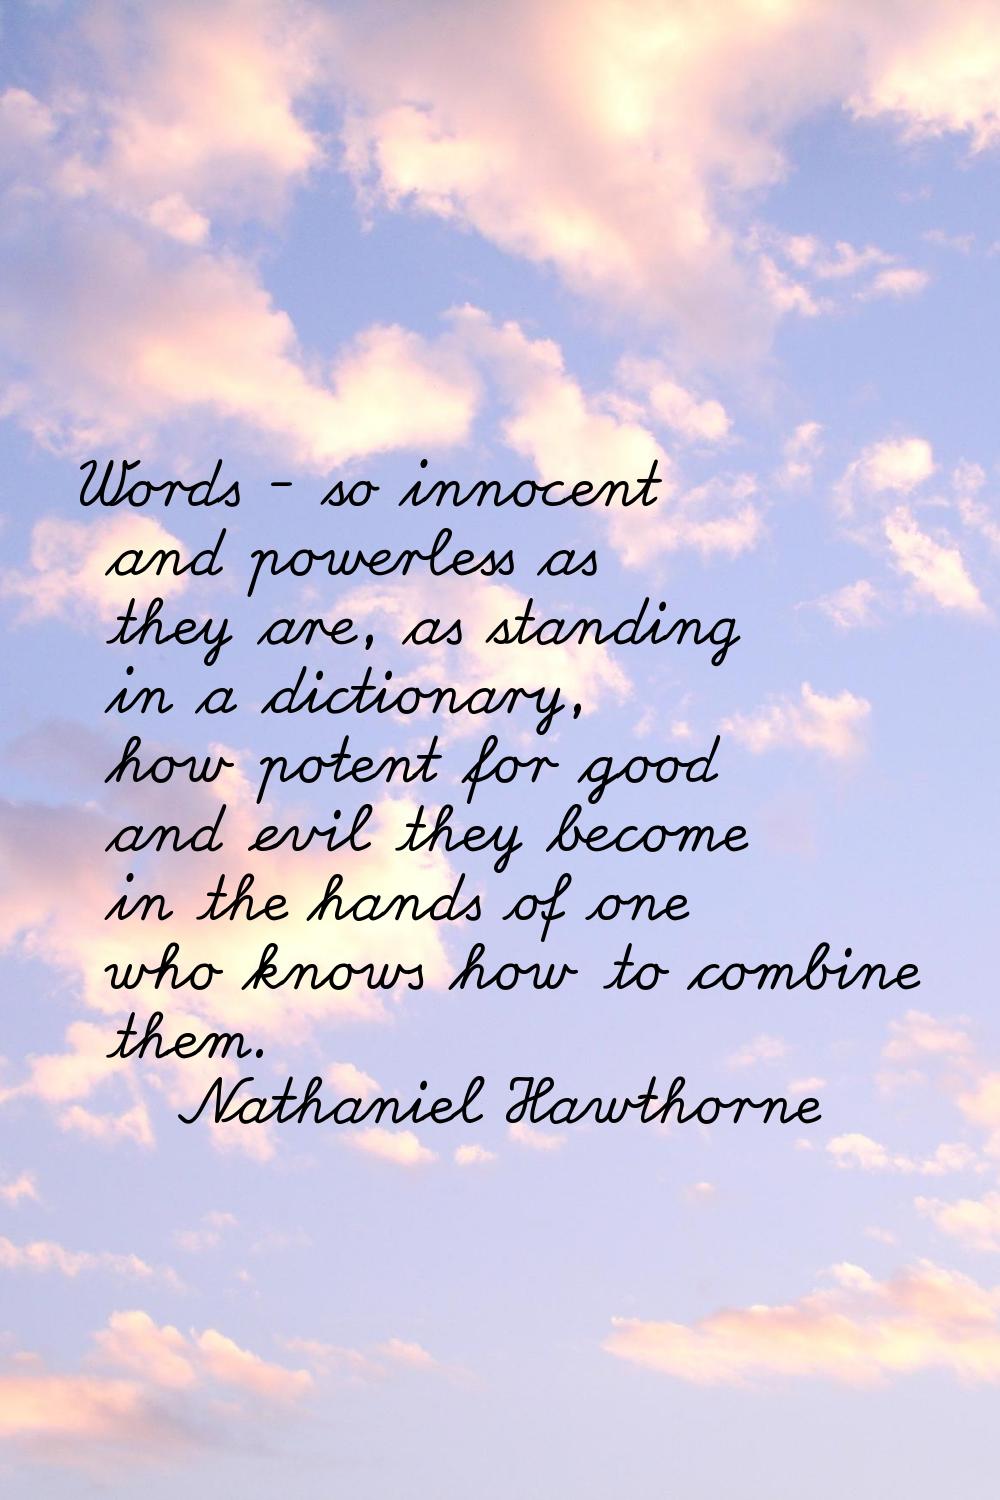 Words - so innocent and powerless as they are, as standing in a dictionary, how potent for good and